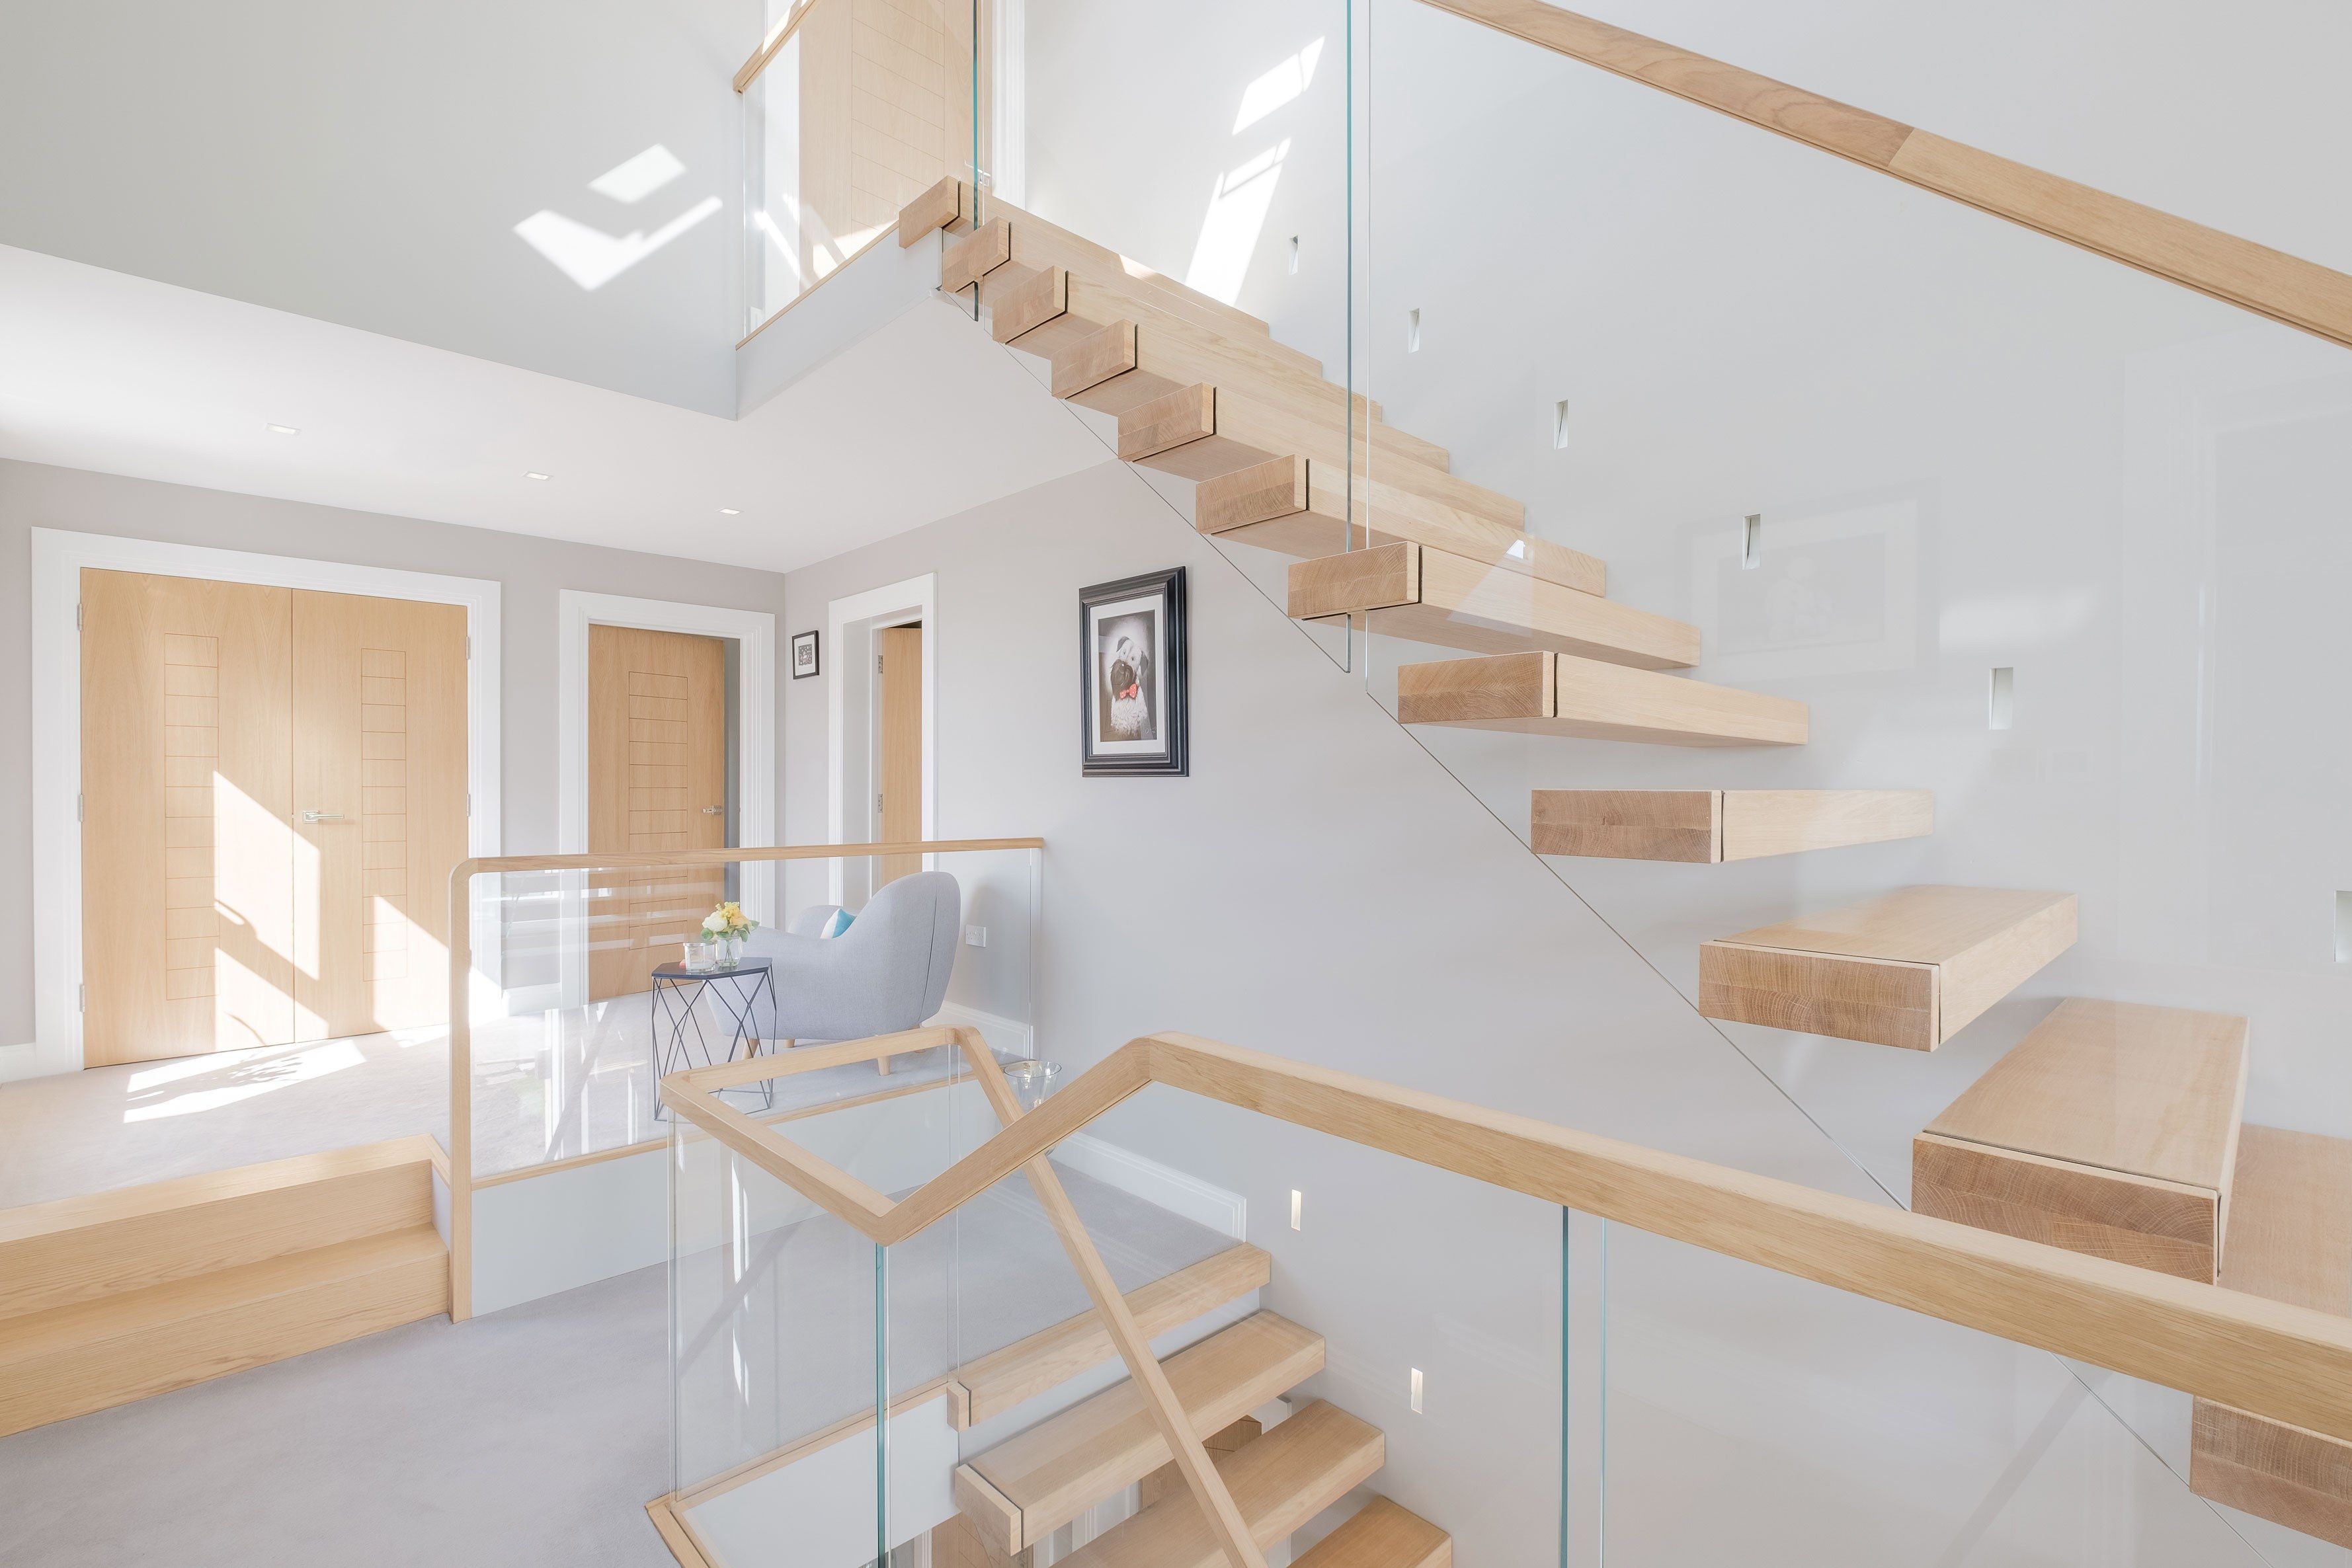 Side view of floating cantilevered oak stair with glass balustrade. Grey walls and carpet with wood doors.